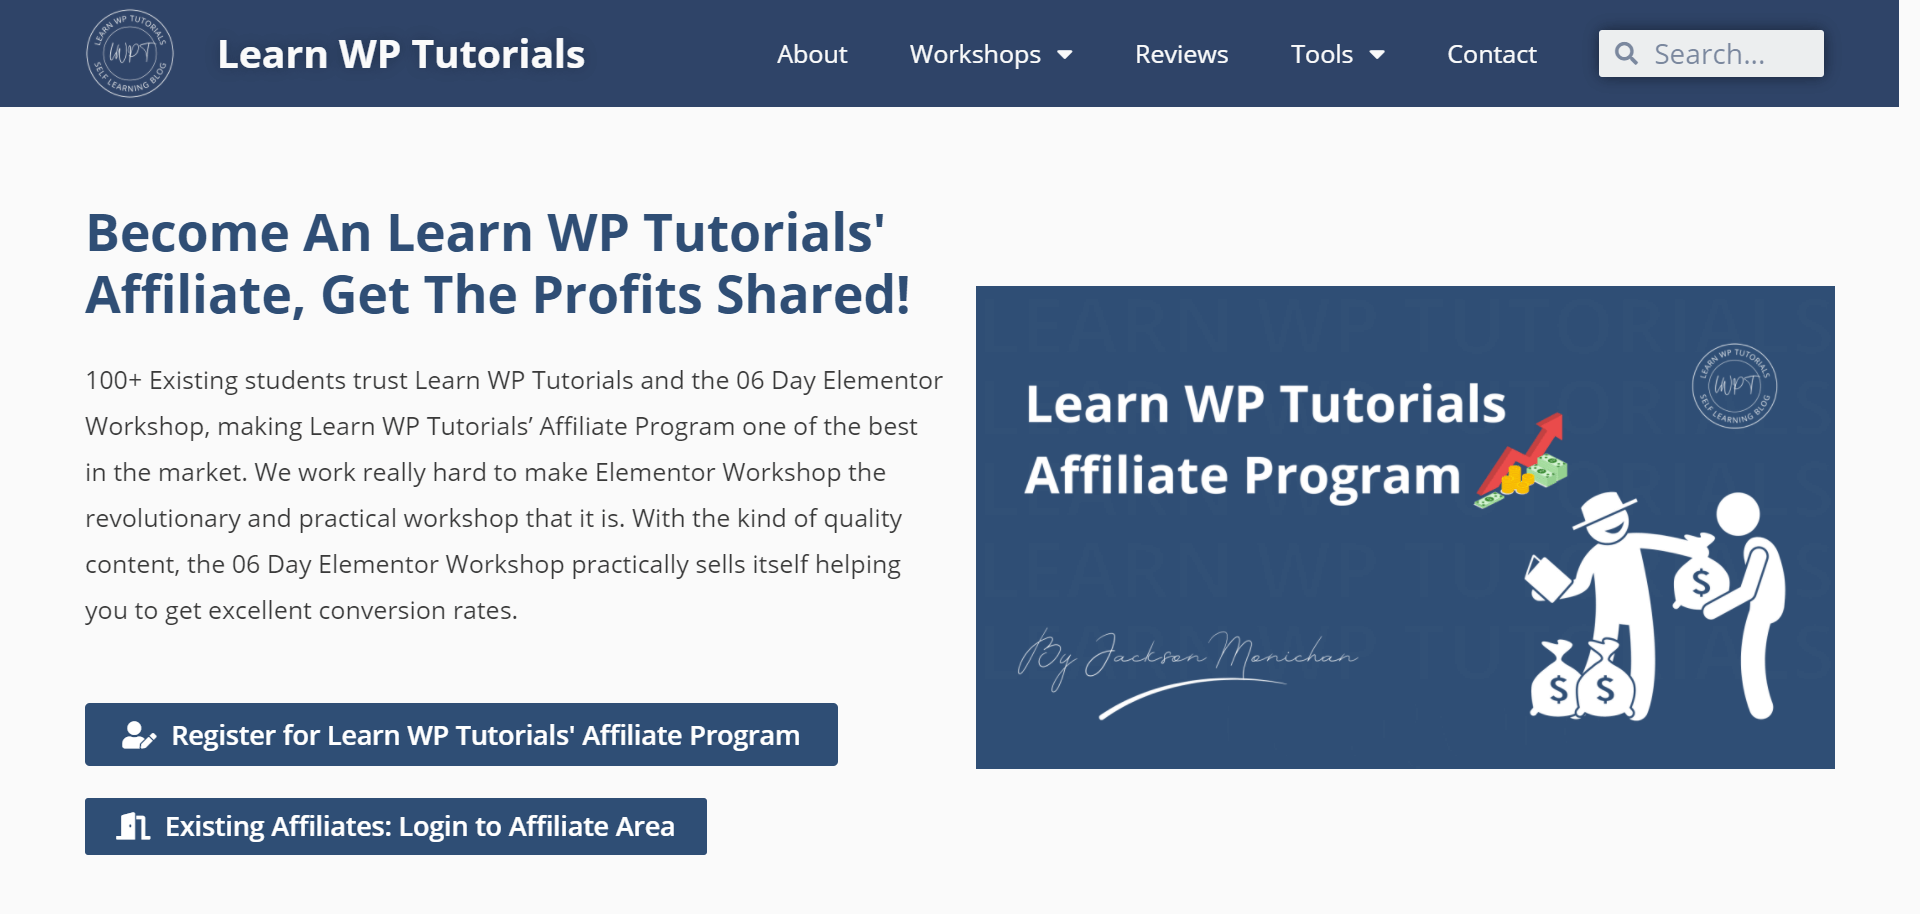 Become An Learn WP Tutorials' Affiliate, Get The Profits Shared!